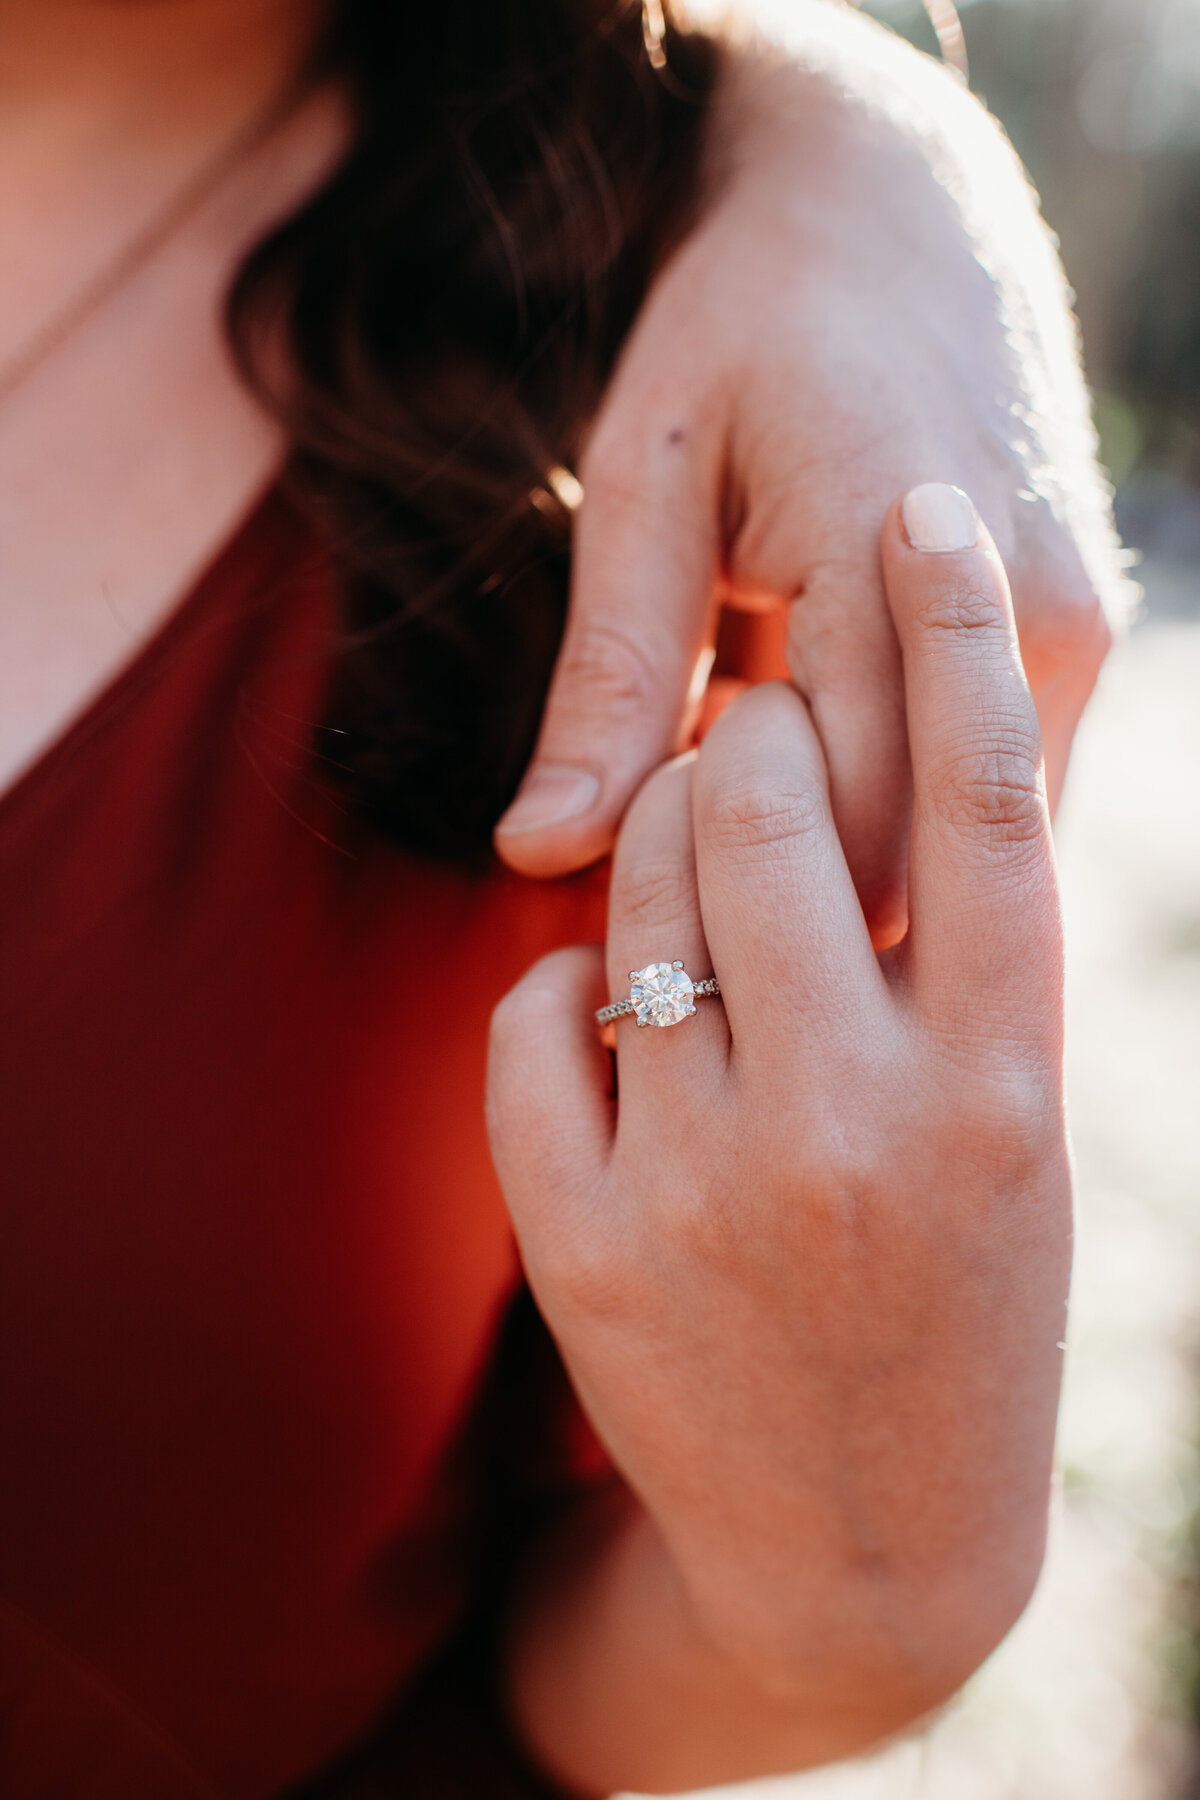 Woman holding man's hand showing off her engagement ring